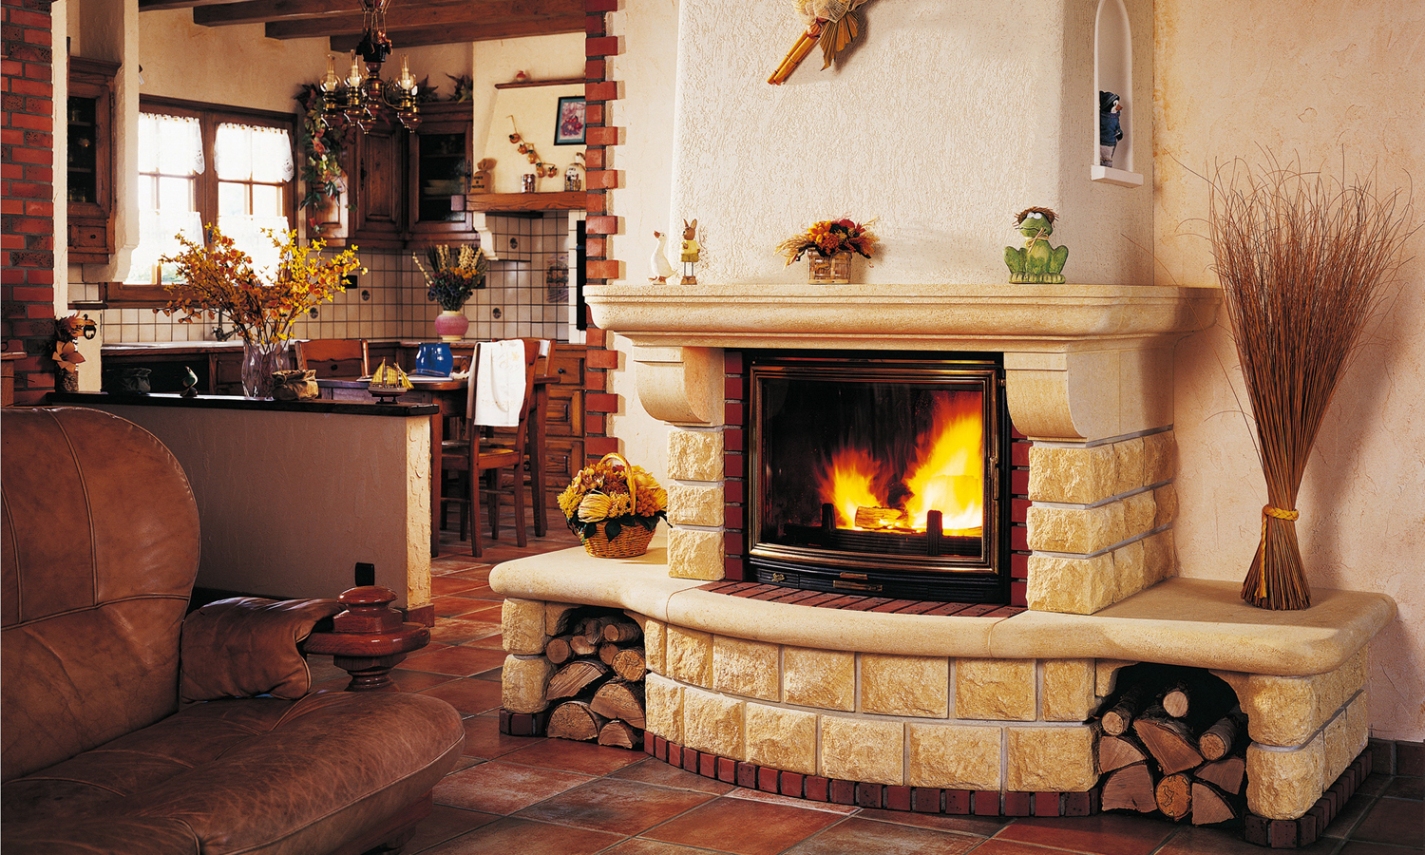 Advanced Wood Heaters: A Great Interior Design Idea To Keep Your House Warm.